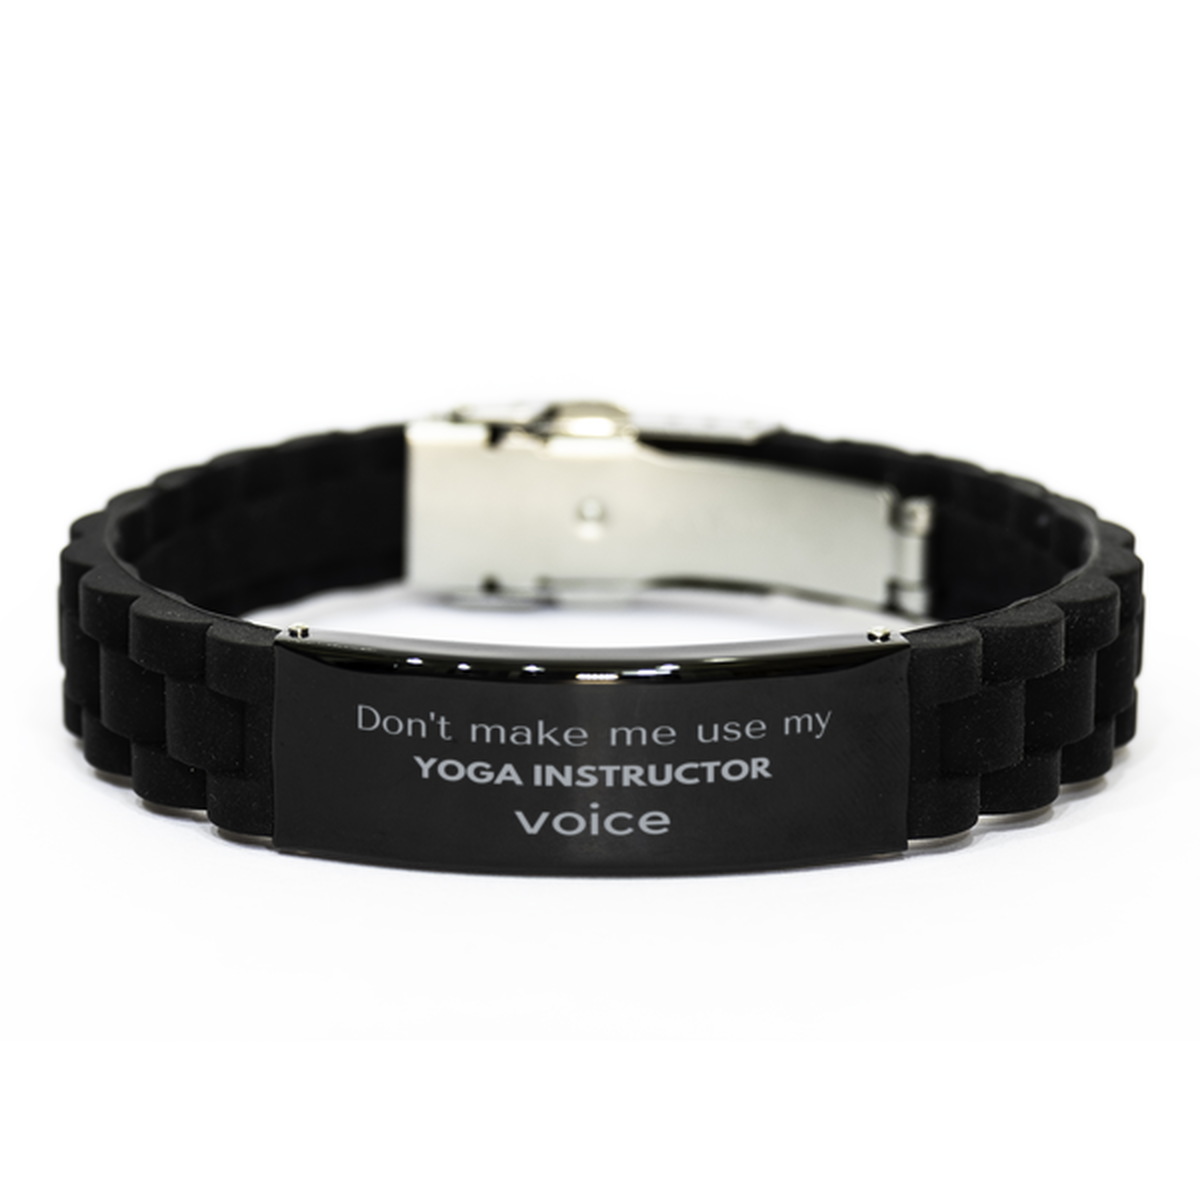 Don't make me use my Yoga Instructor voice, Sarcasm Yoga Instructor Gifts, Christmas Yoga Instructor Black Glidelock Clasp Bracelet Birthday Unique Gifts For Yoga Instructor Coworkers, Men, Women, Colleague, Friends